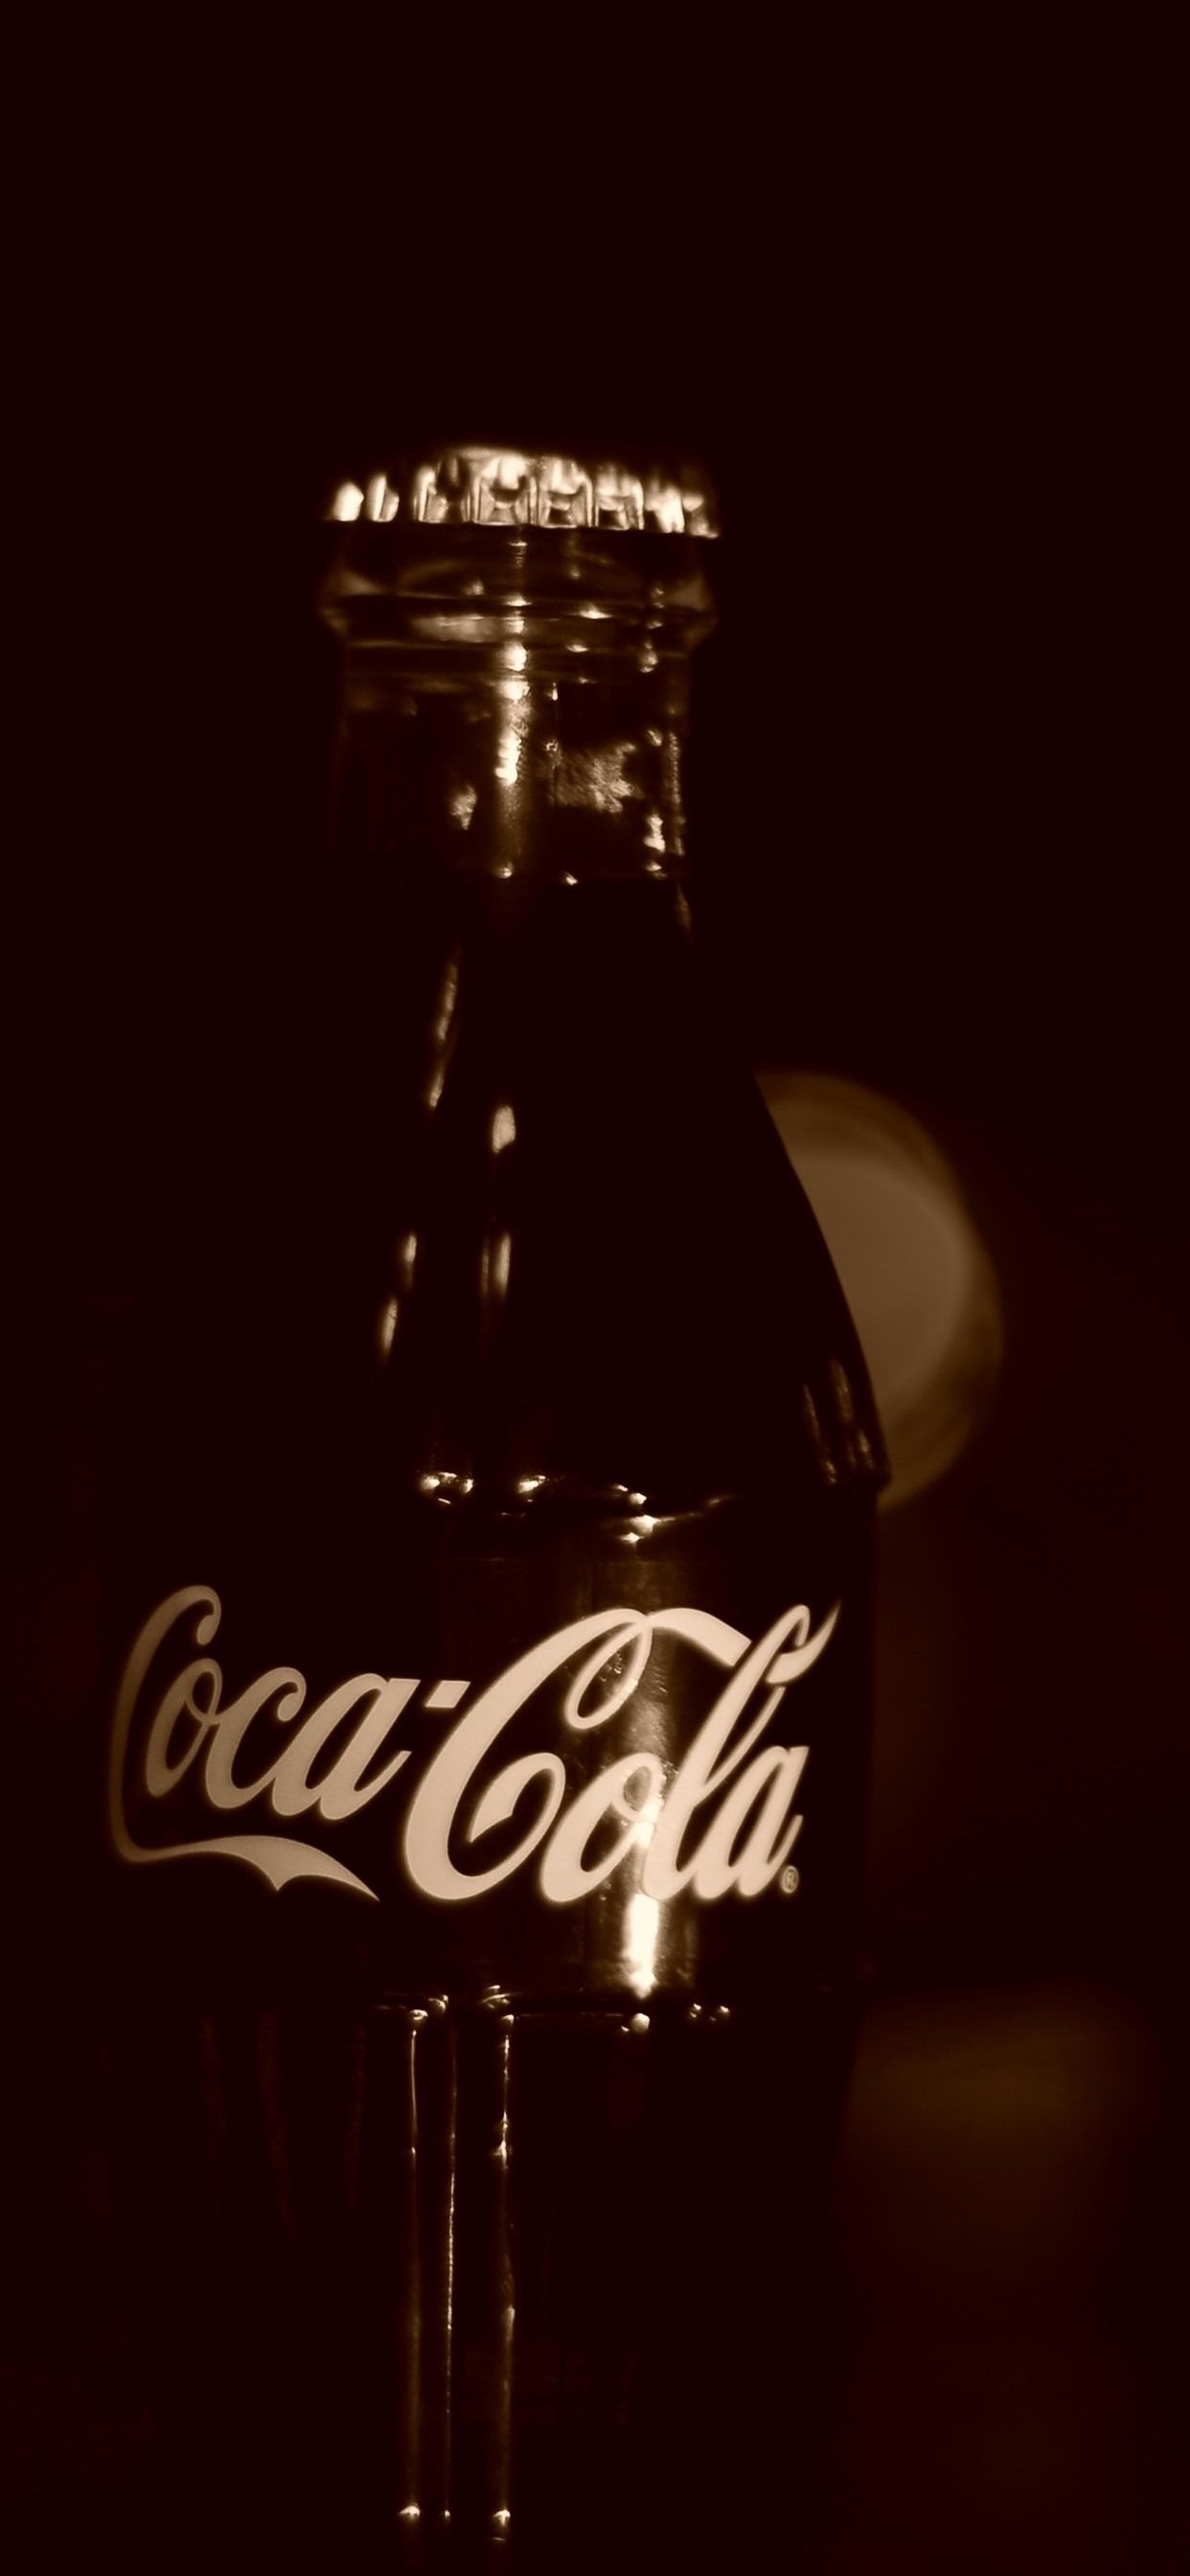 Coca Cola, Drinks, Bottle, Darkness 1242x2688 IPhone 11 Pro XS Max Wallpaper, Background, Picture, Image